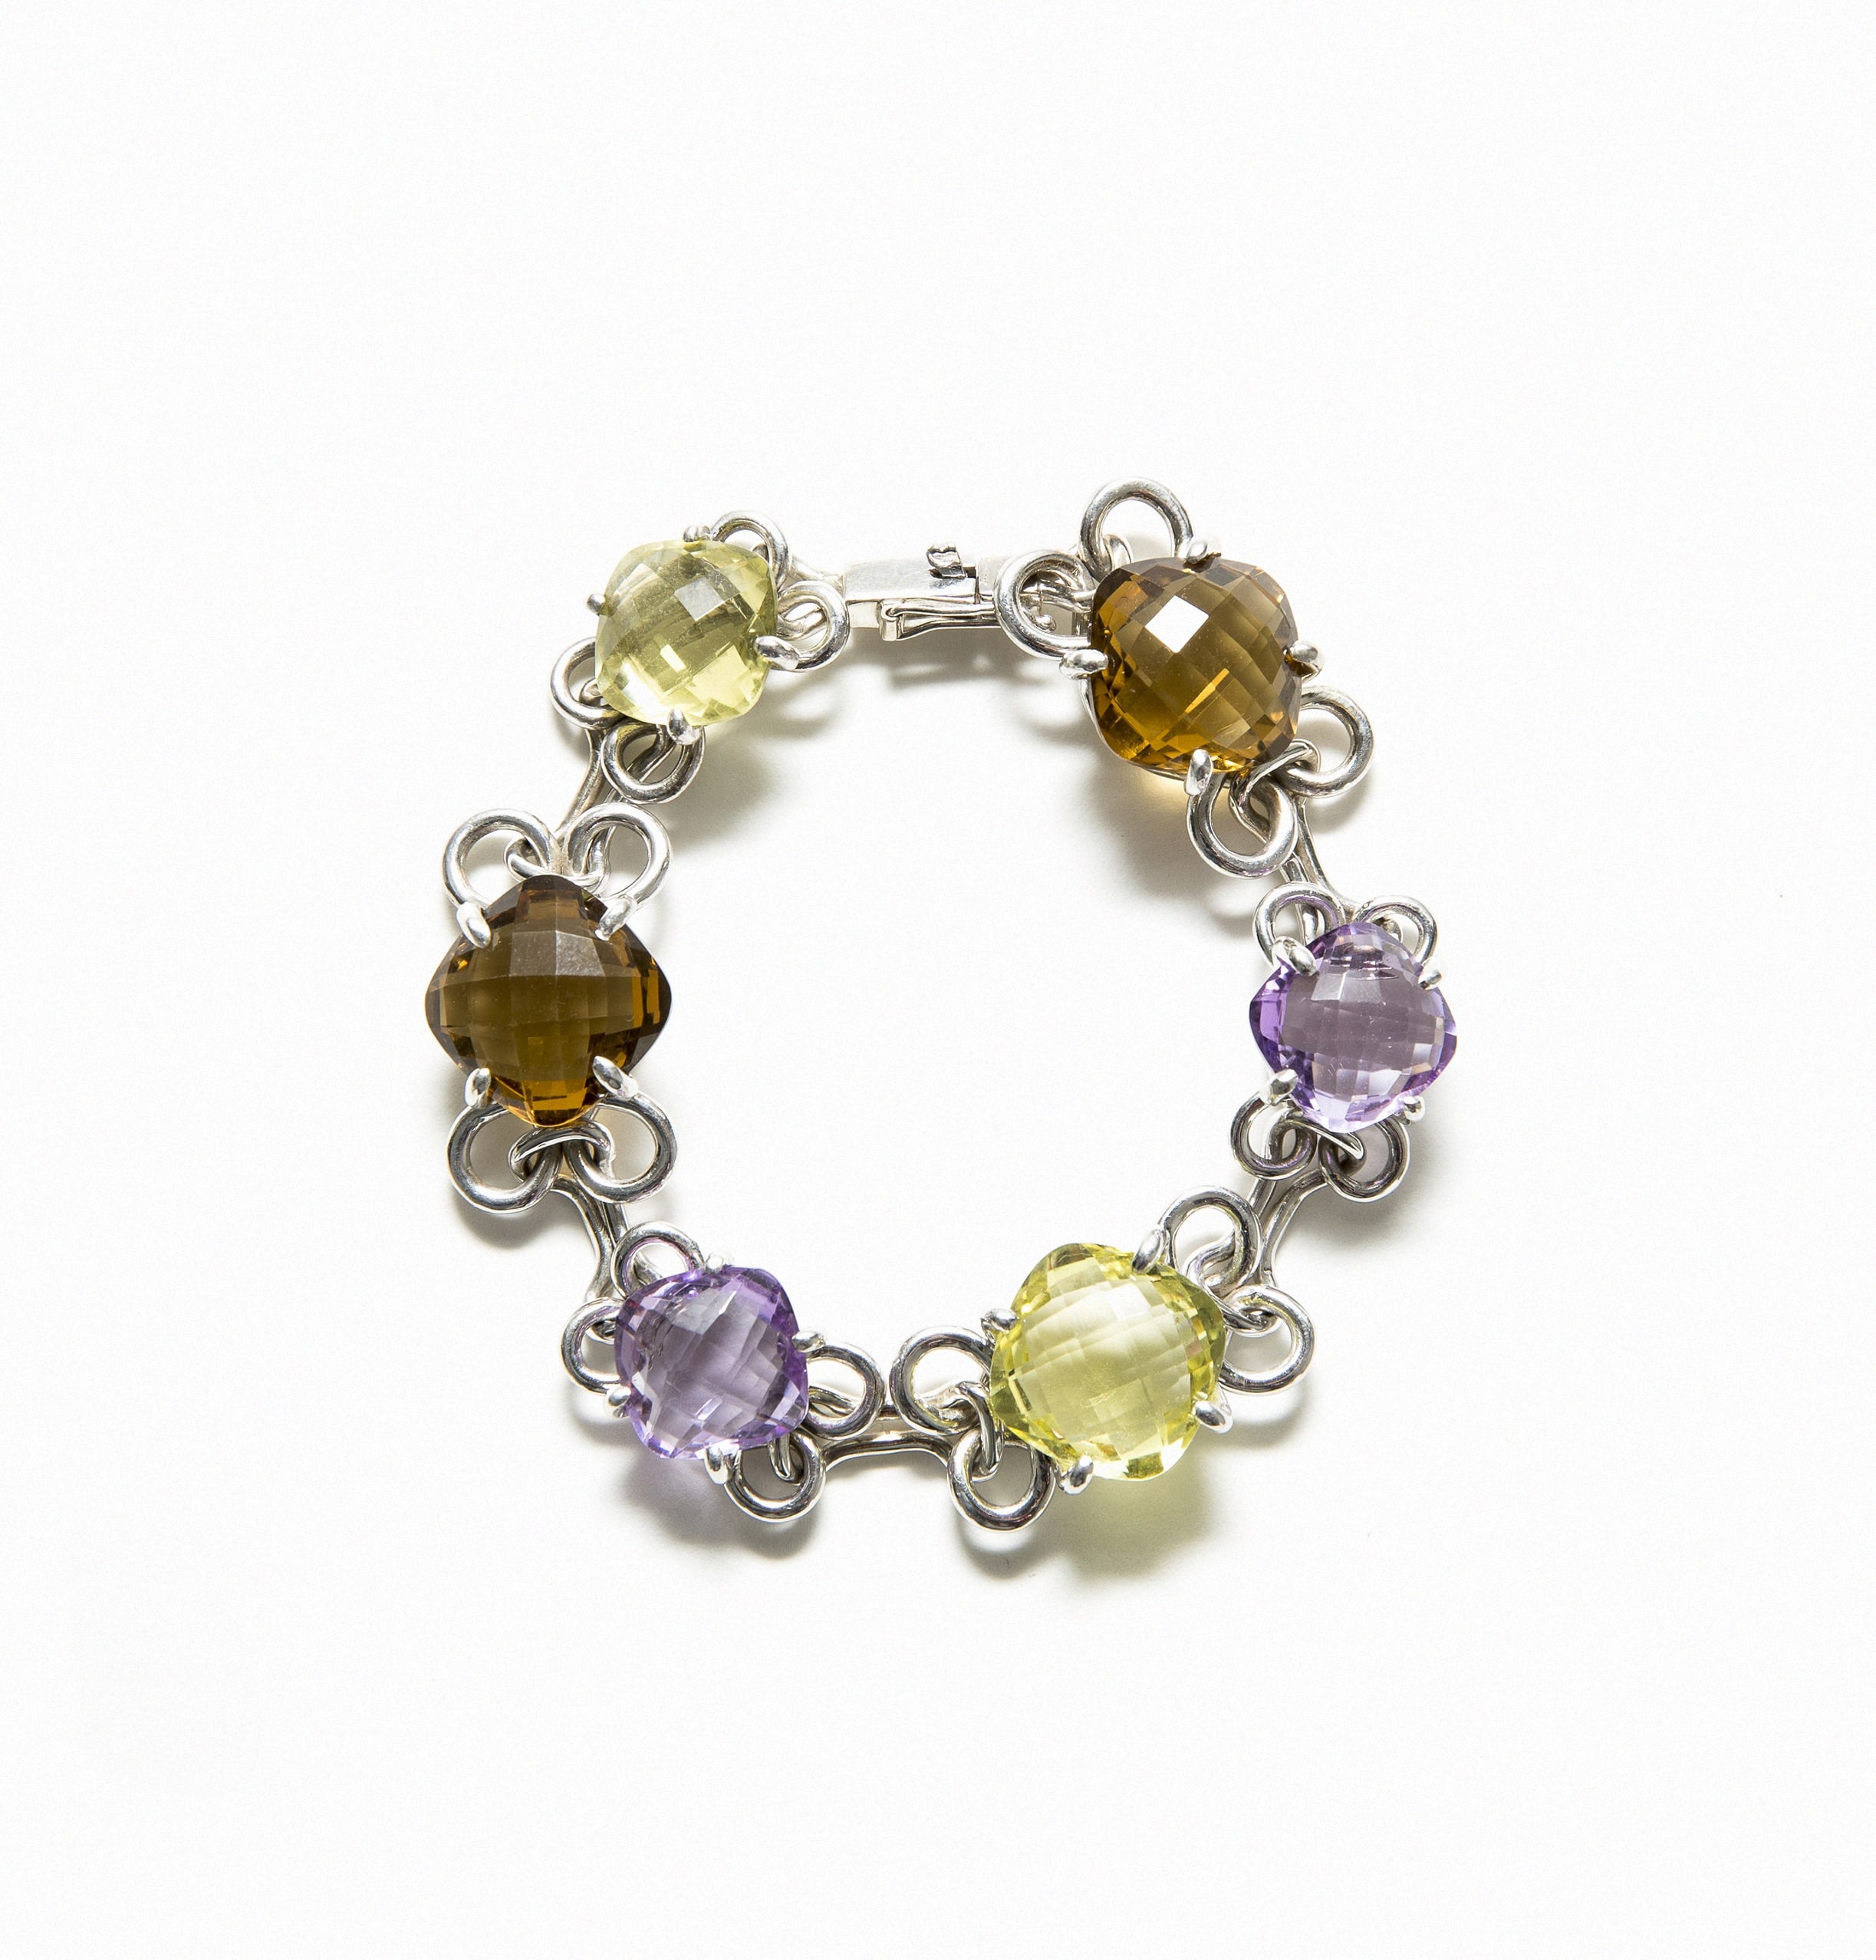 Articulated silver bracelet with Lemon, smoky and amethyst quartz